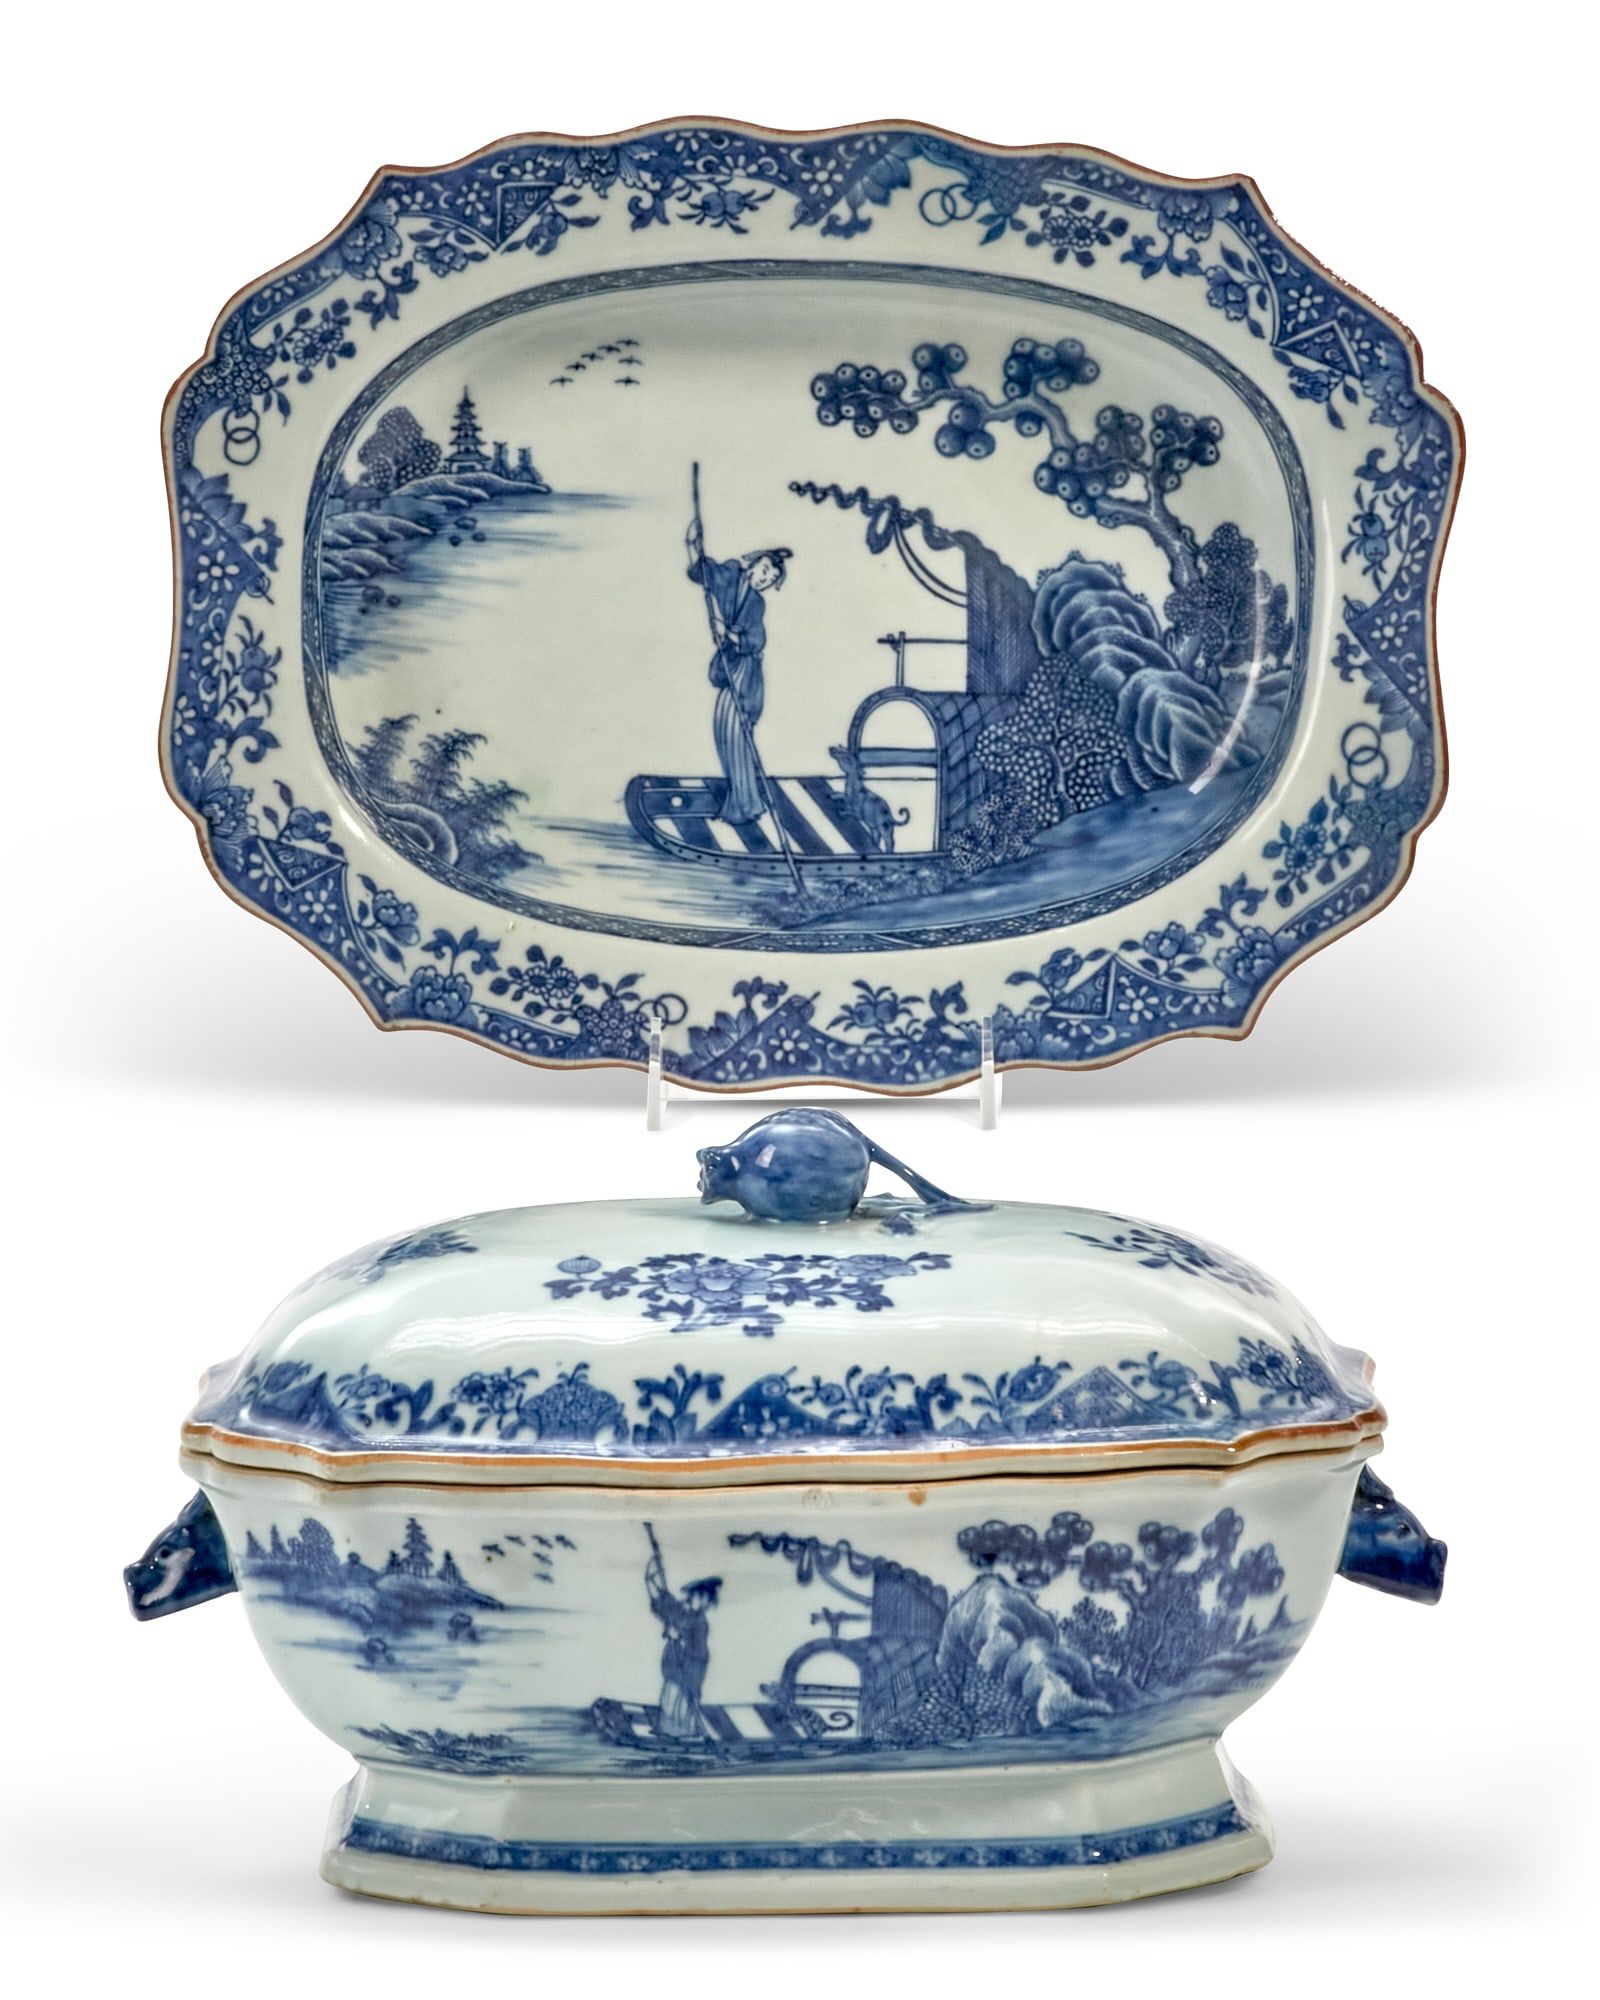 A CHINESE PORCELAIN COVERED TUREEN